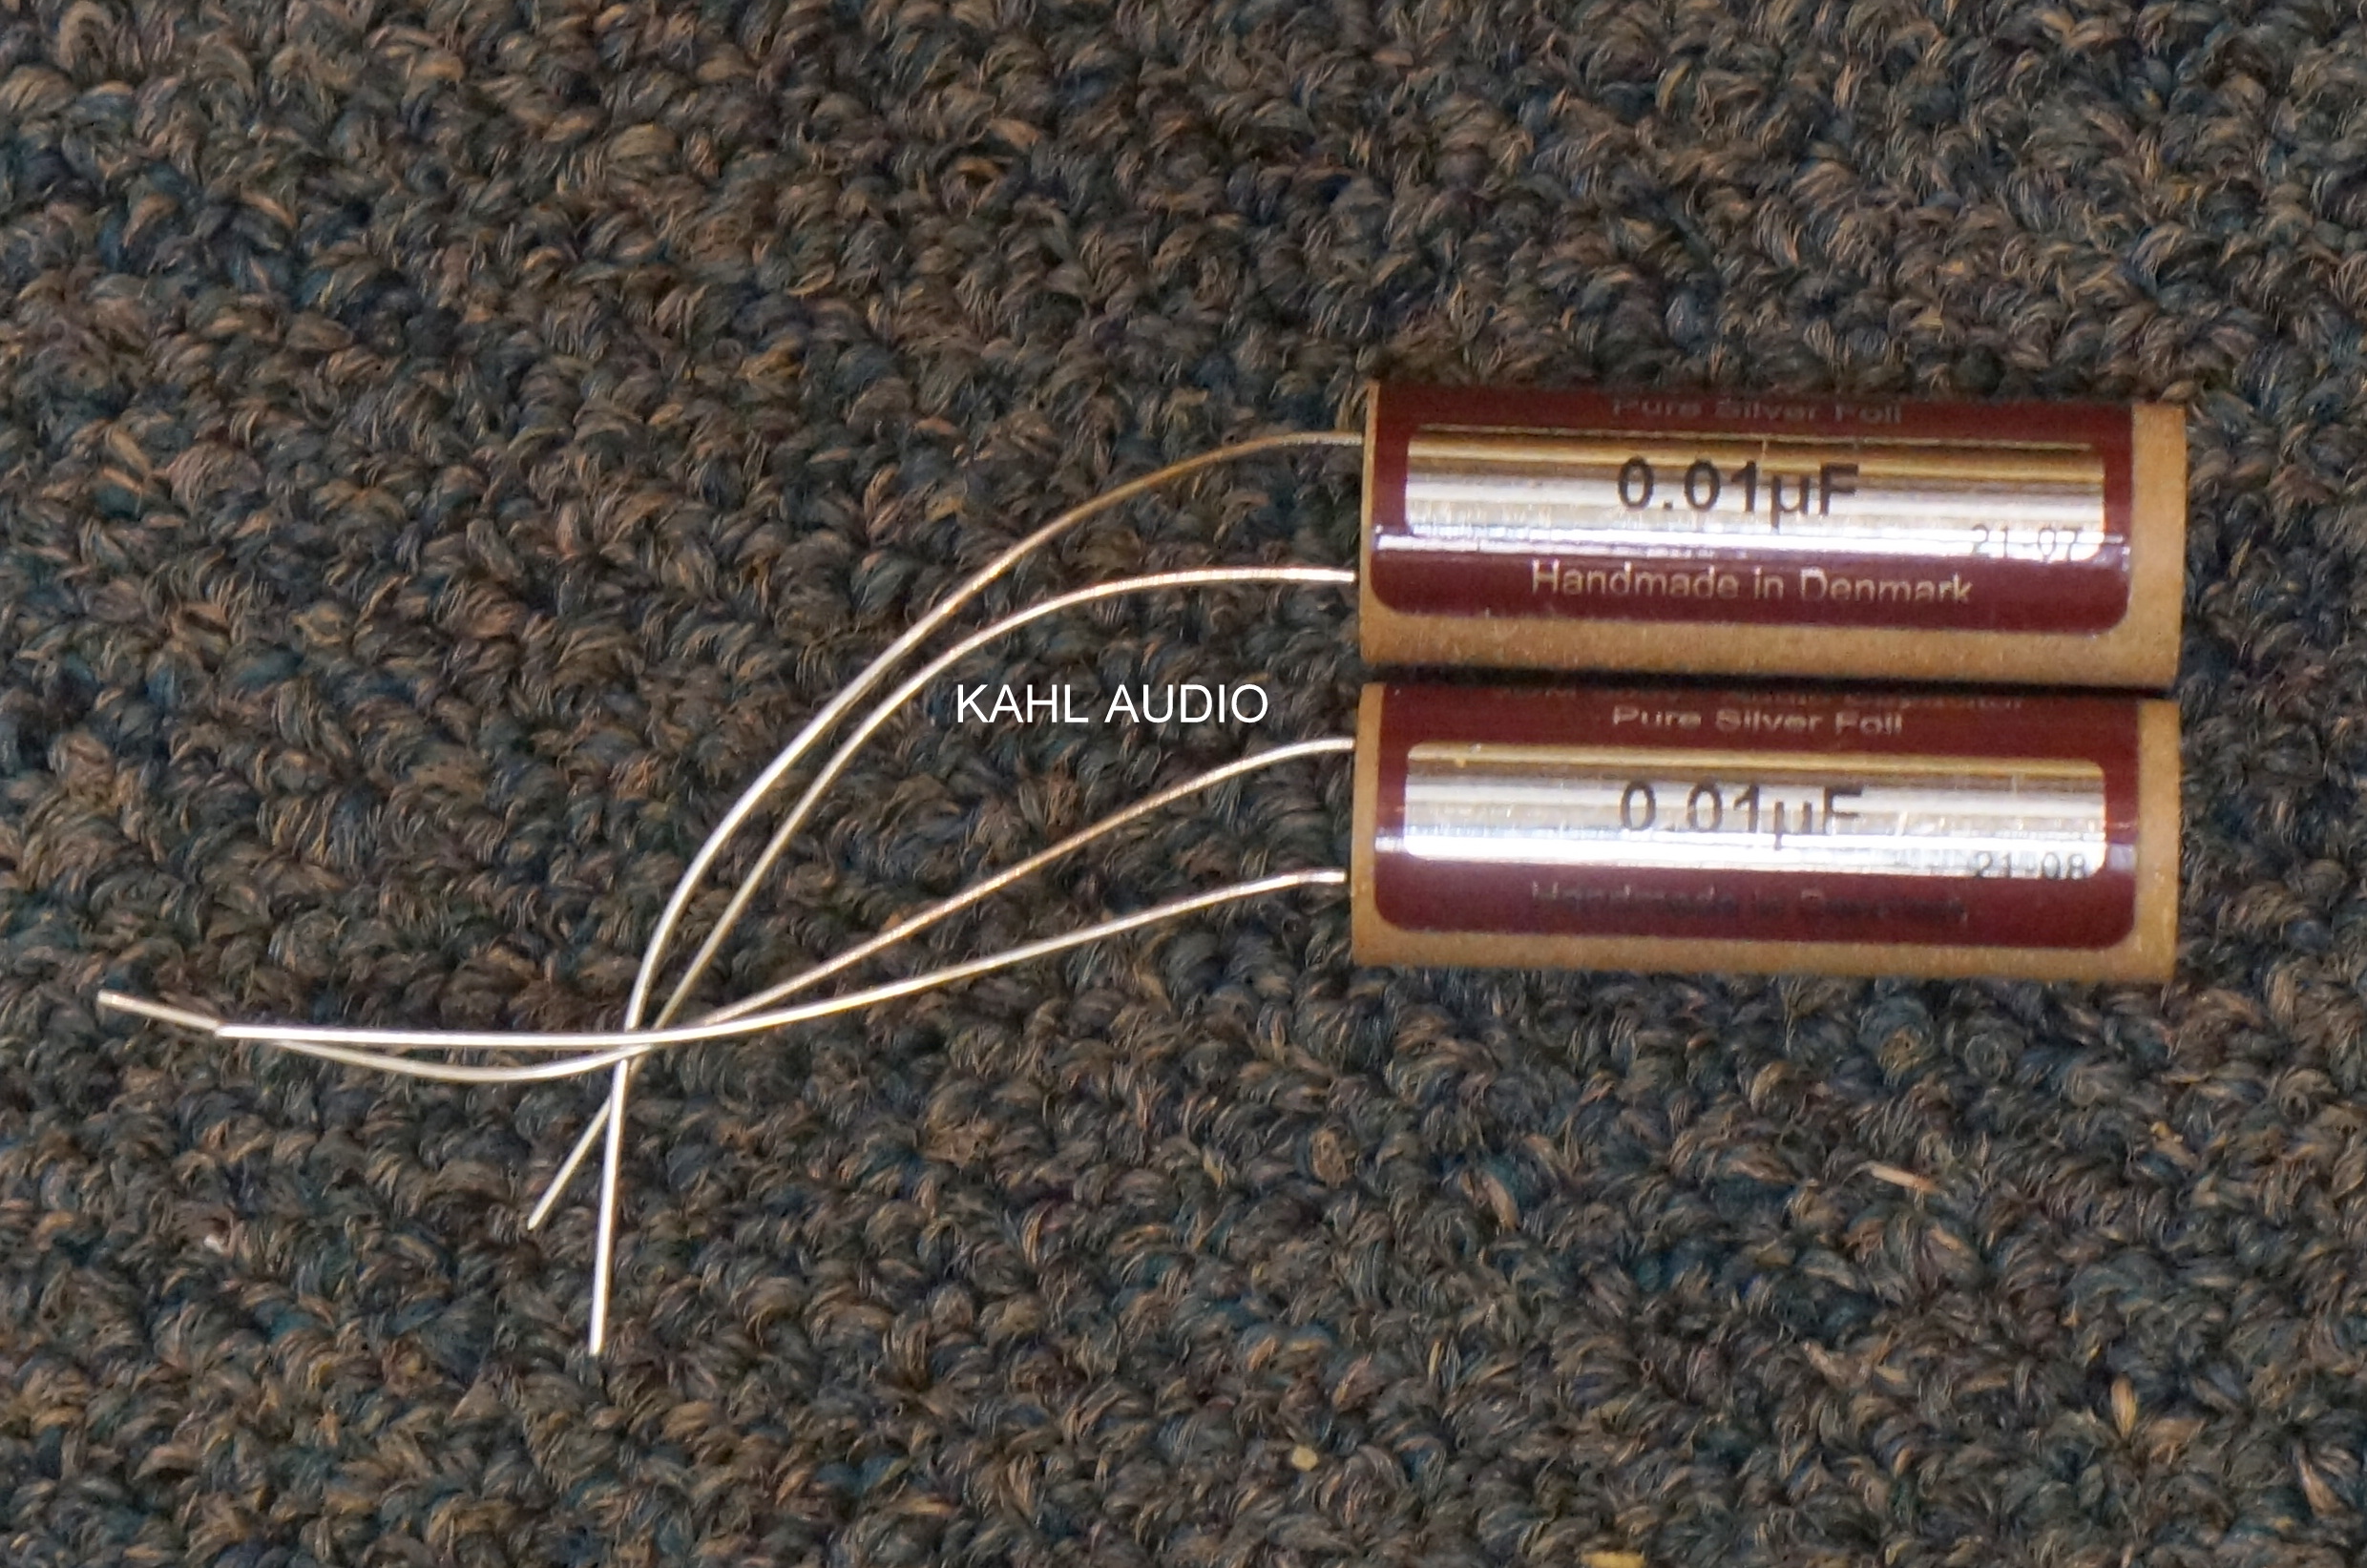 Duelund 0.01uF 600Vdc JDM-Ag Pure Silver Foil BYPASS Capacitor. NEW. 1 pr.  $148 MSRP